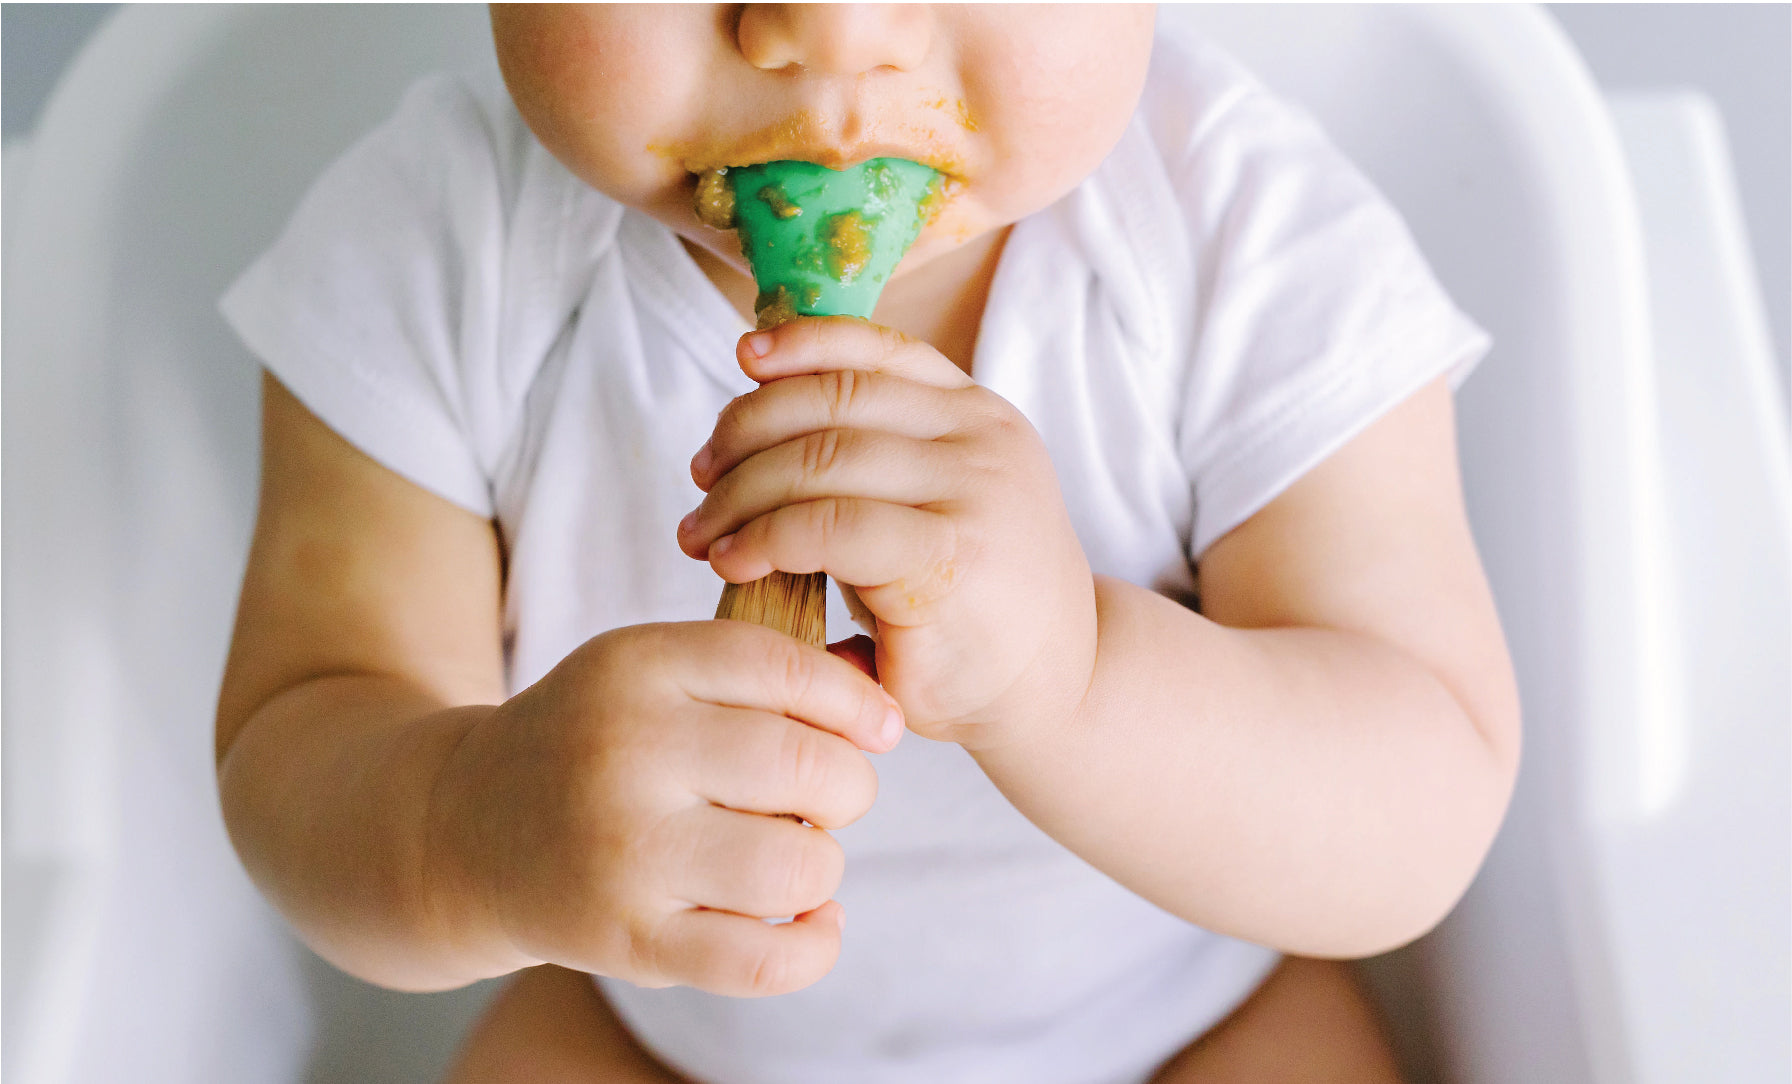 Introducing Solids: Why We Love Both Baby-Led Weaning and Purees